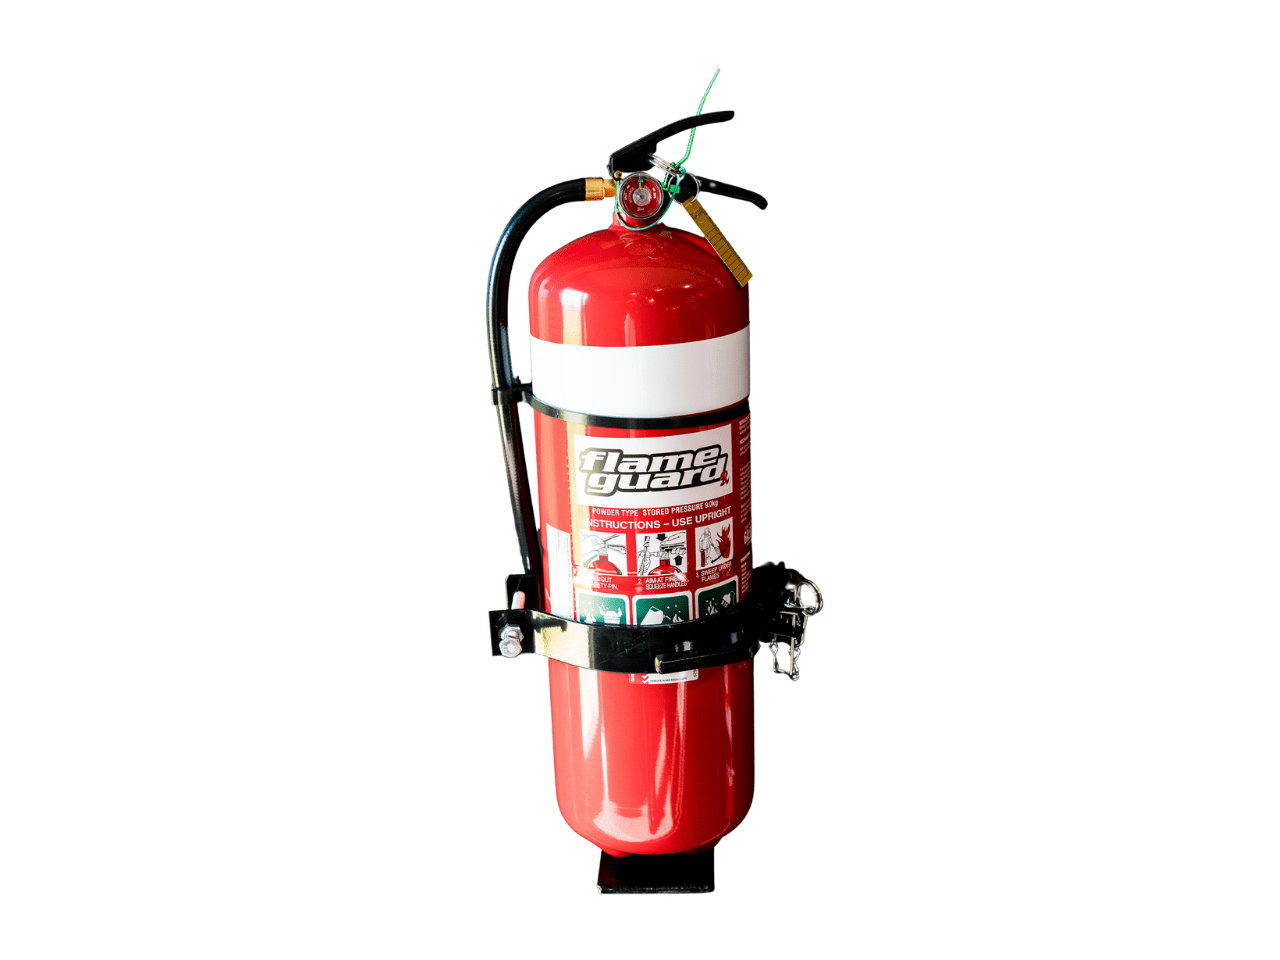 ABC Powder Fire Extinguisher 6 kg - Advanced Safety - Safety in Knowledge